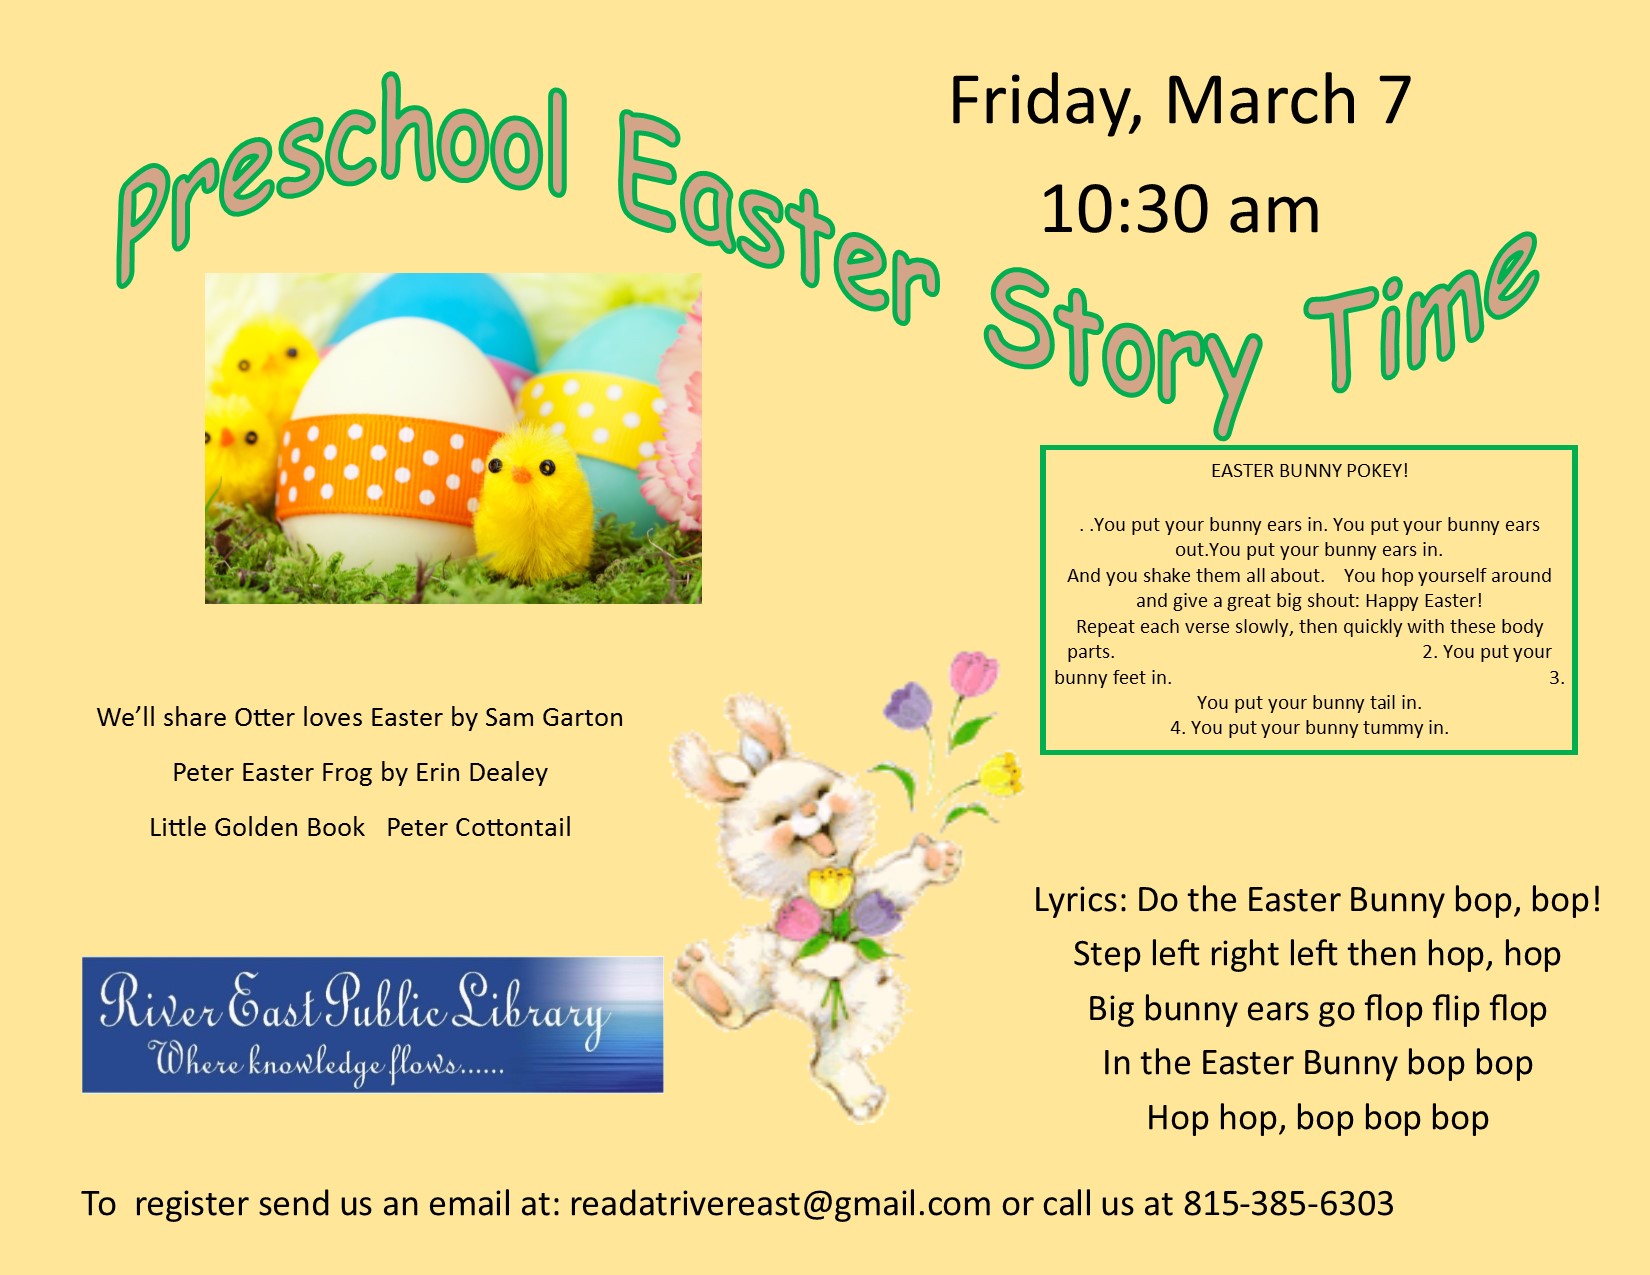 Poster for our Easter story time